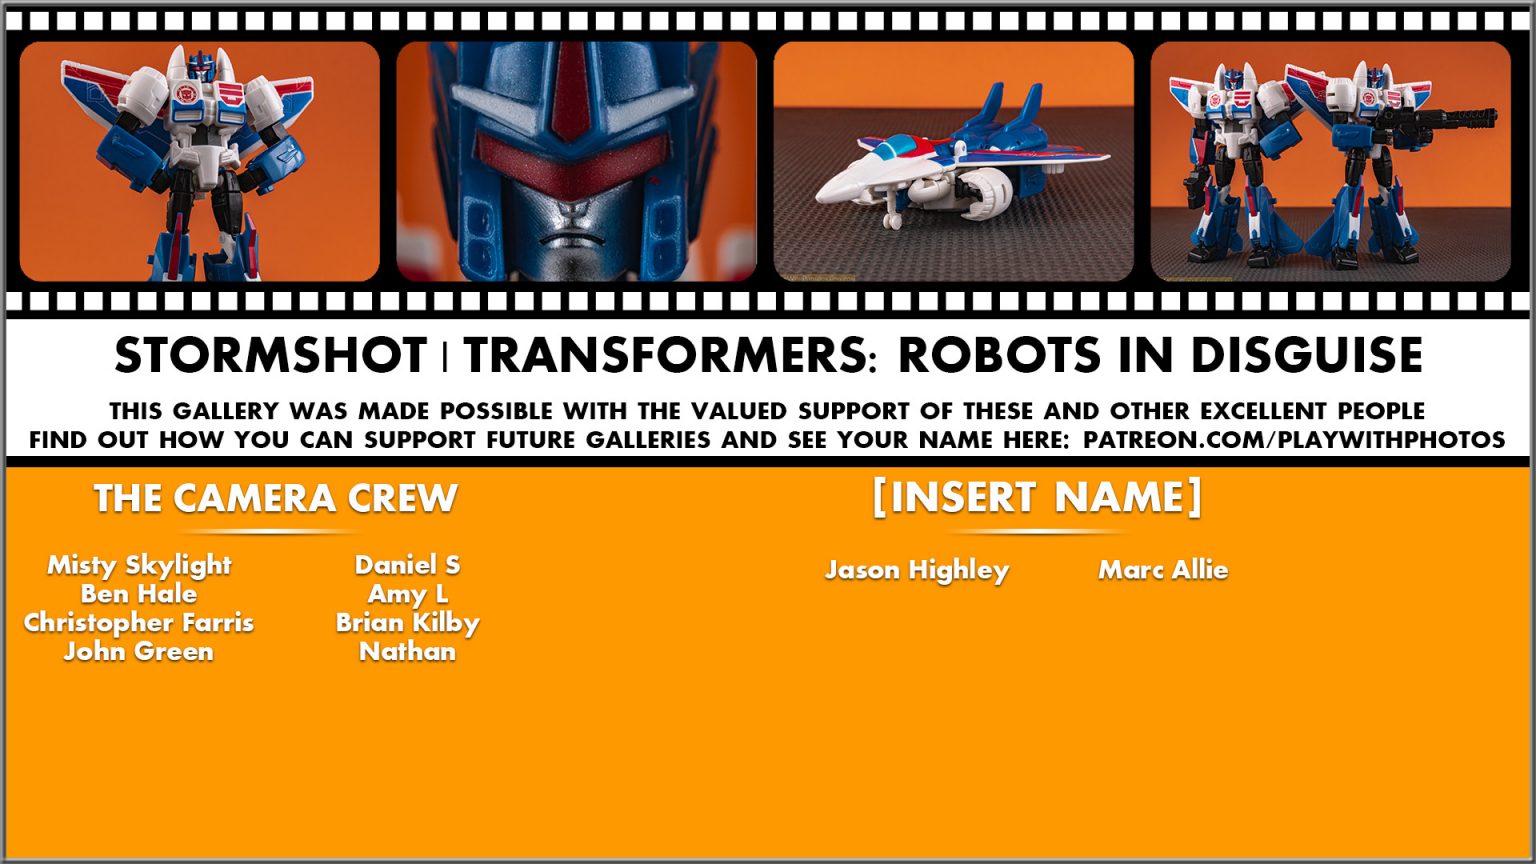 stormshot transformers in disguise 2015 instructions